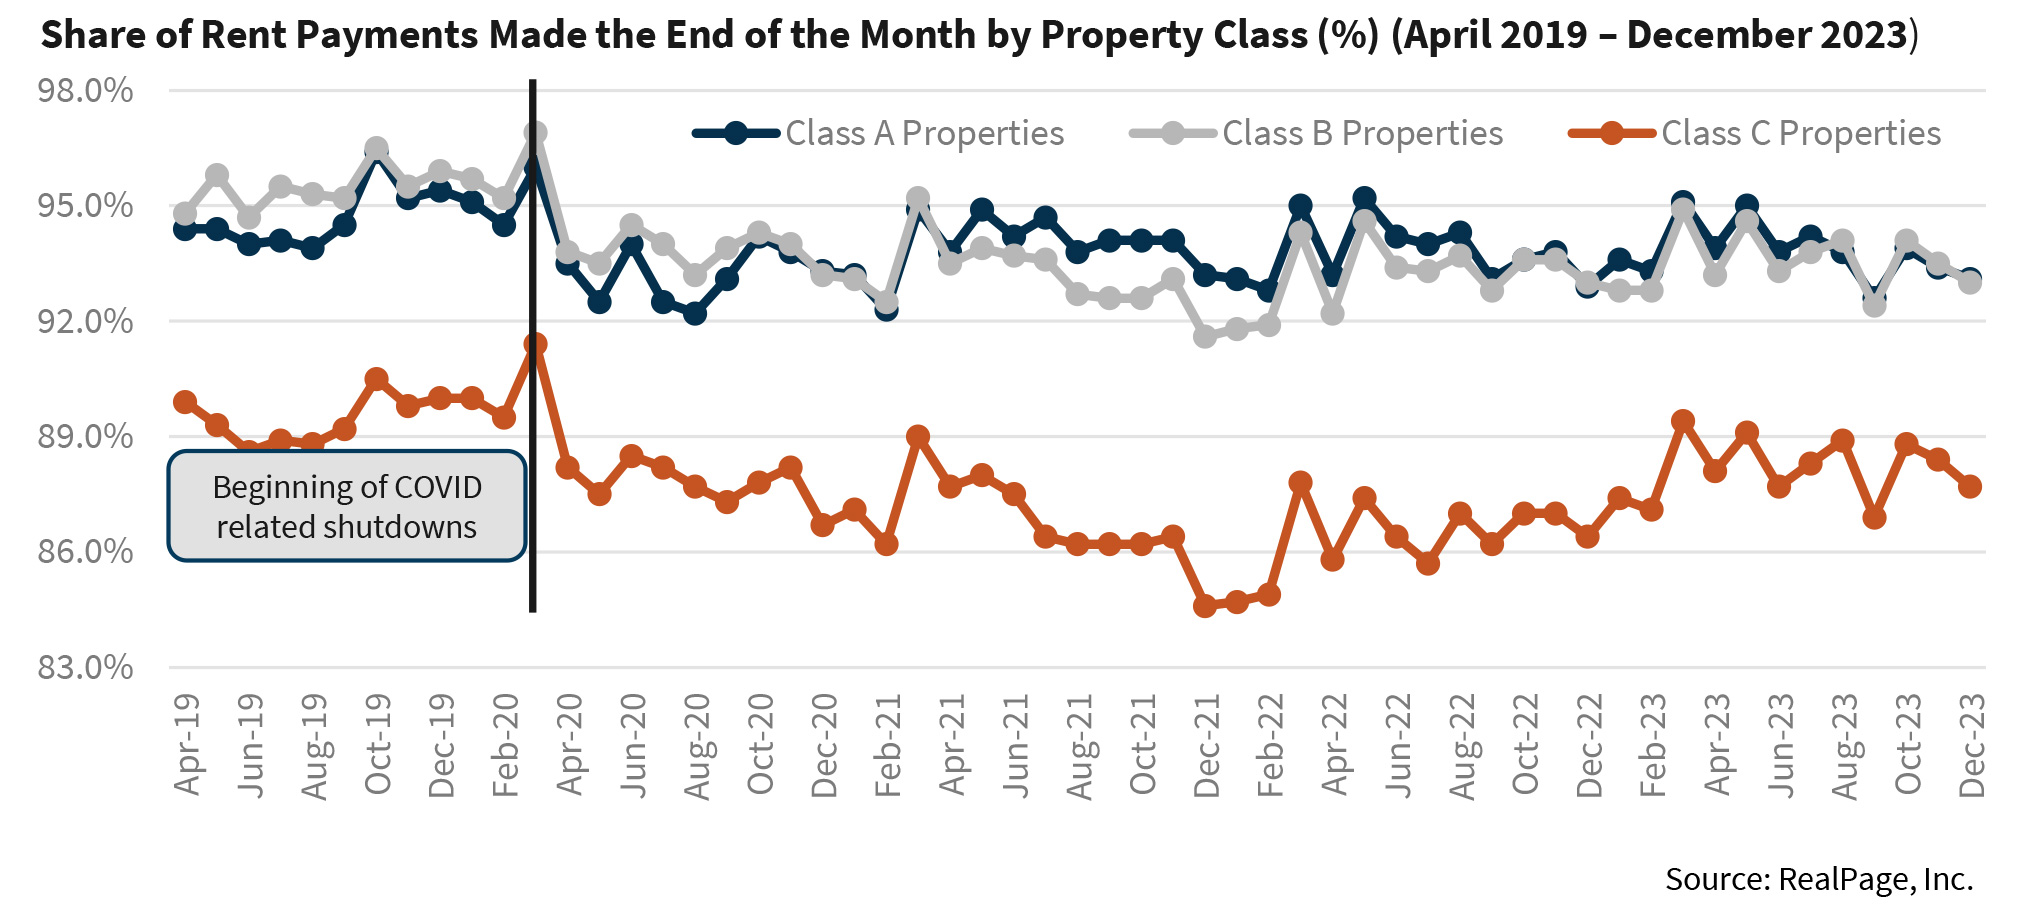 Share of Rent Payments Made the End of the Month by Property Class (%) (April 2019 – December 2023)